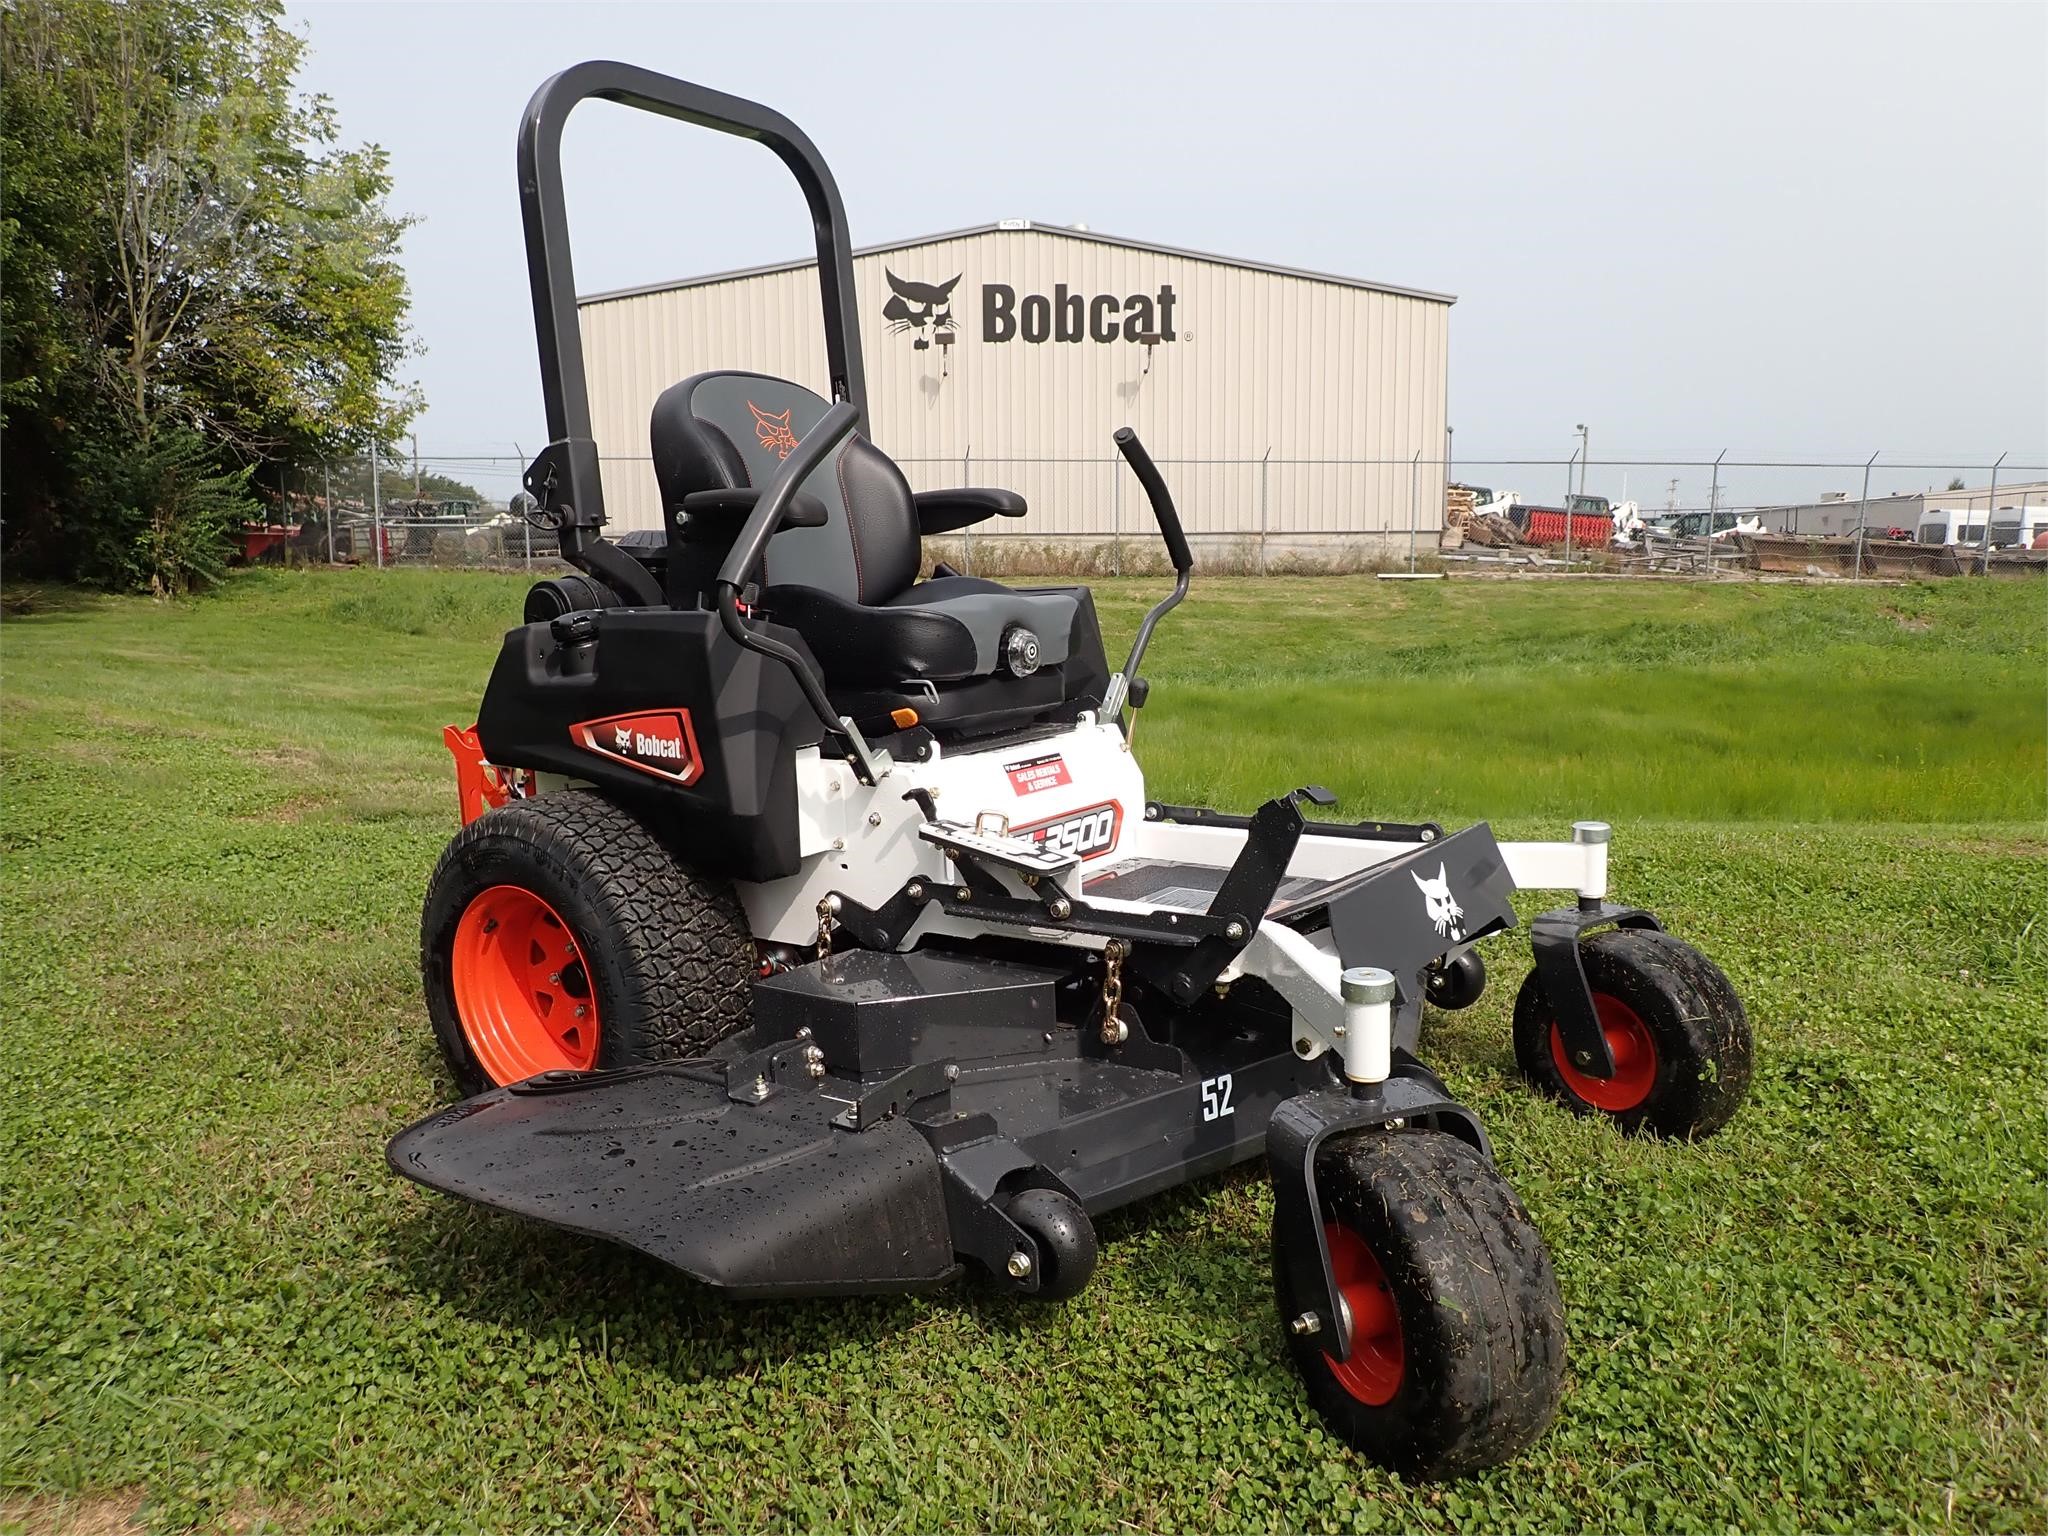 bobcat-zero-turn-lawn-mowers-for-sale-59-listings-tractorhouse